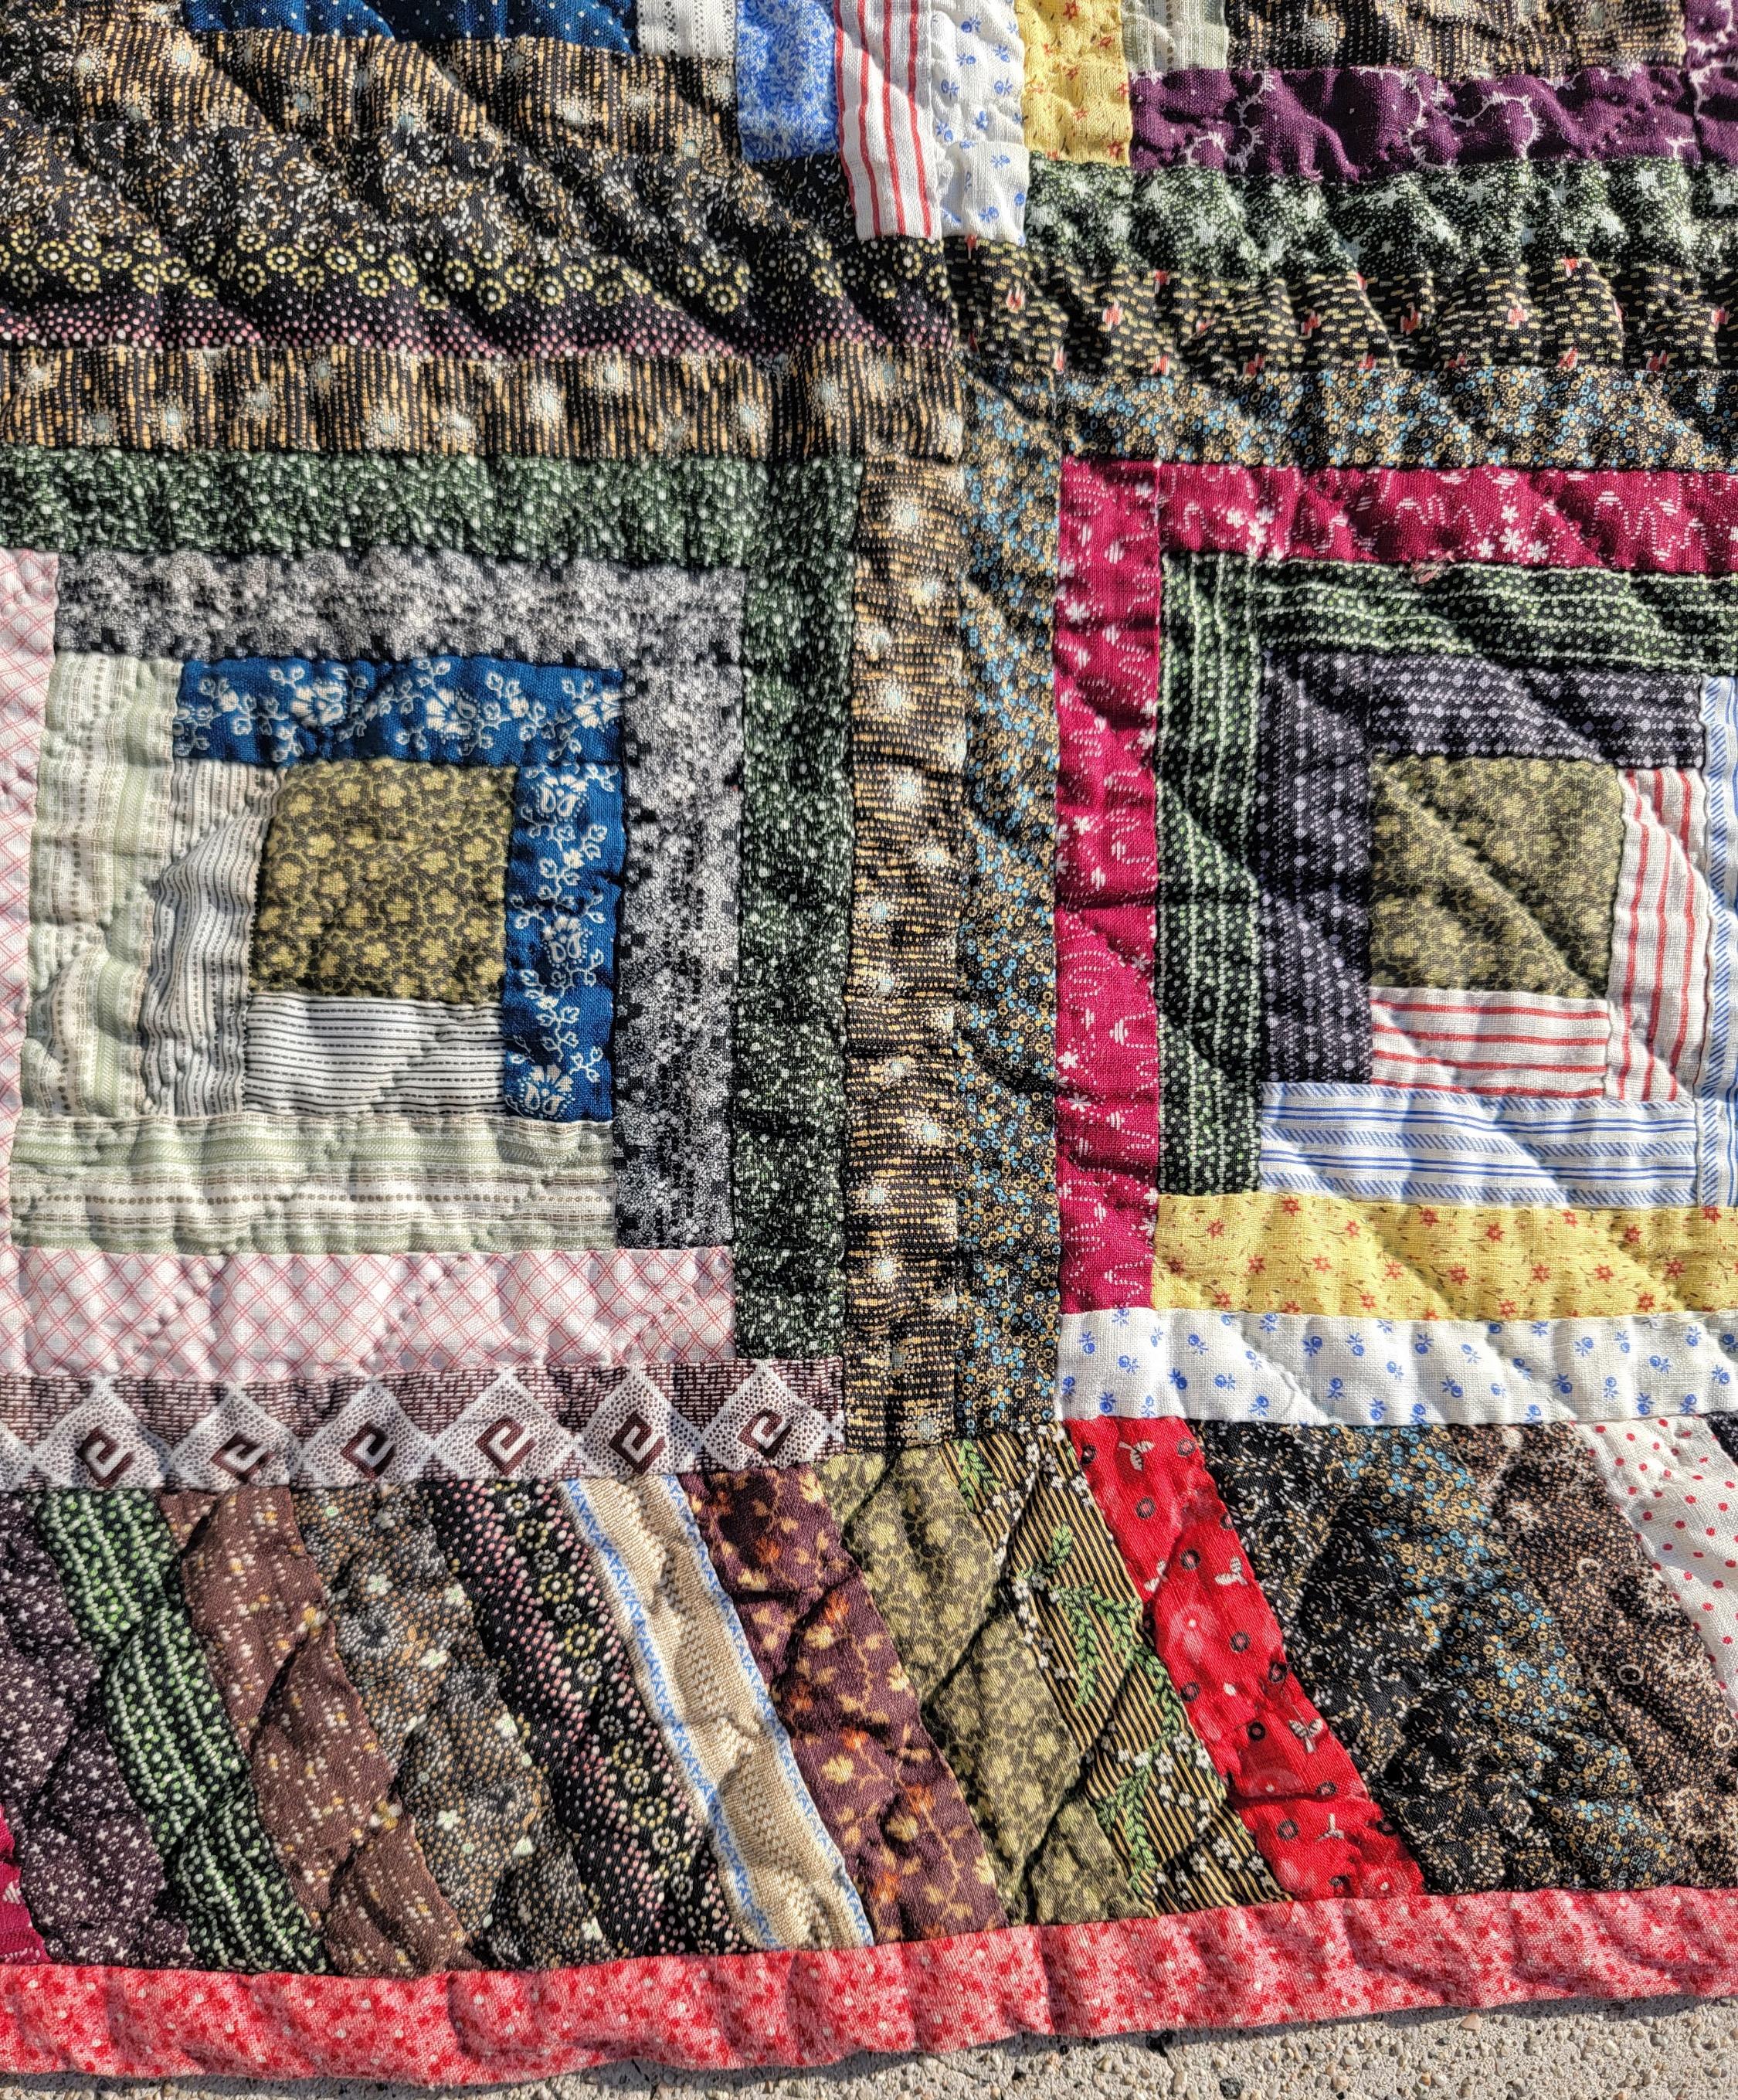 19Thc cotton log cabin quilt with striped border. This quilt was found in Lancaster County, Pennsylvania.